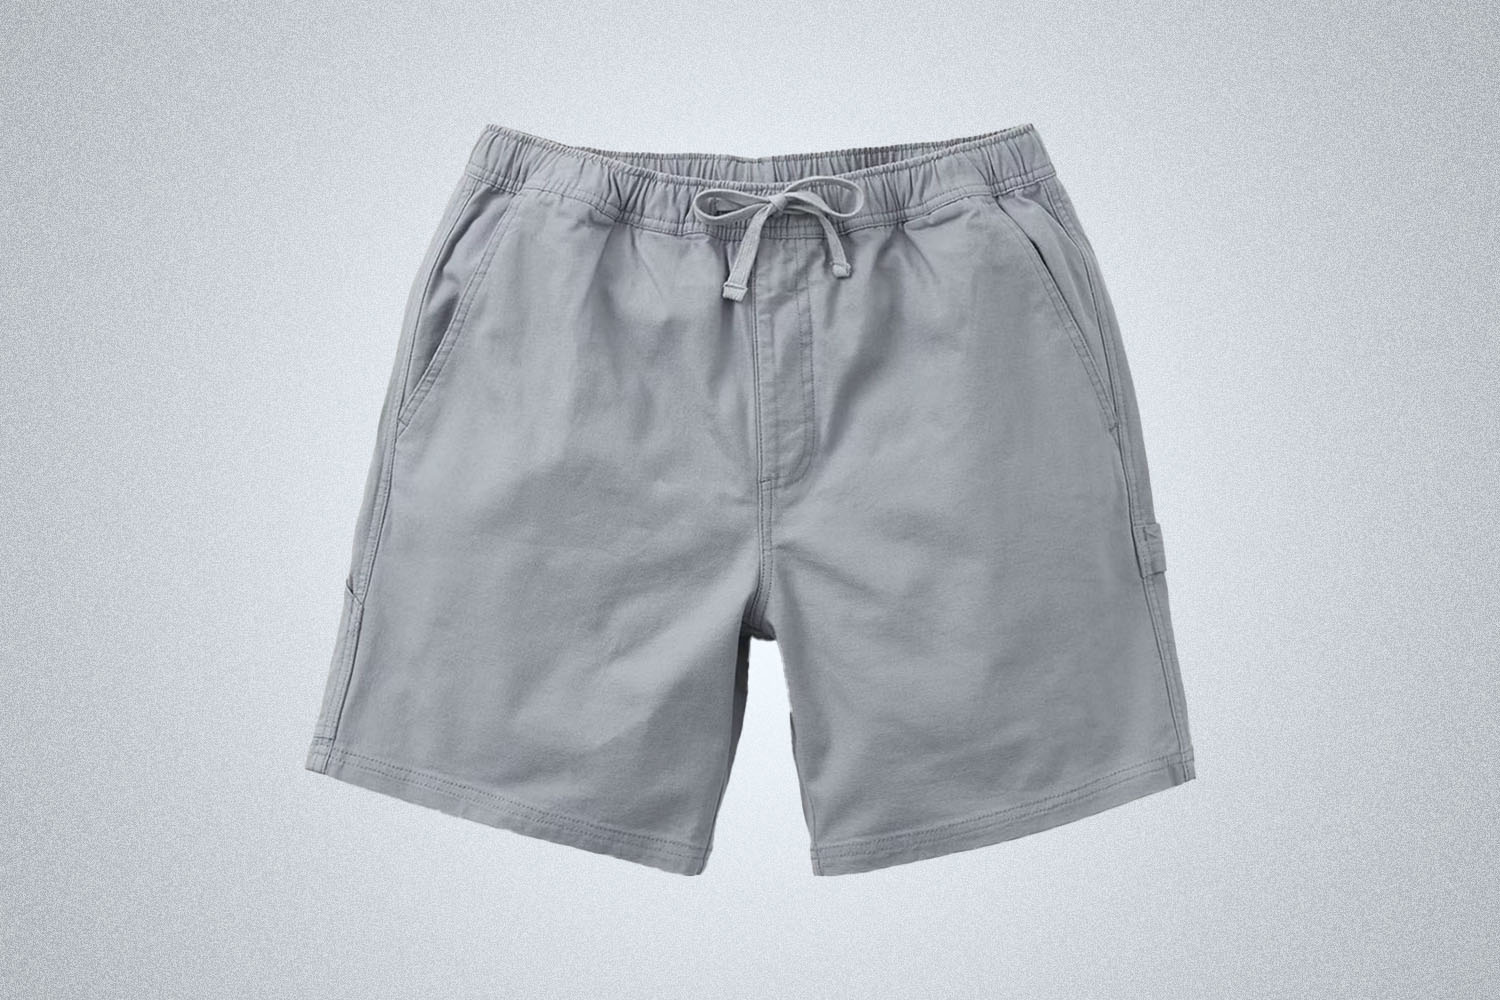 a pair of grey utility shorts from Katin on a grey background